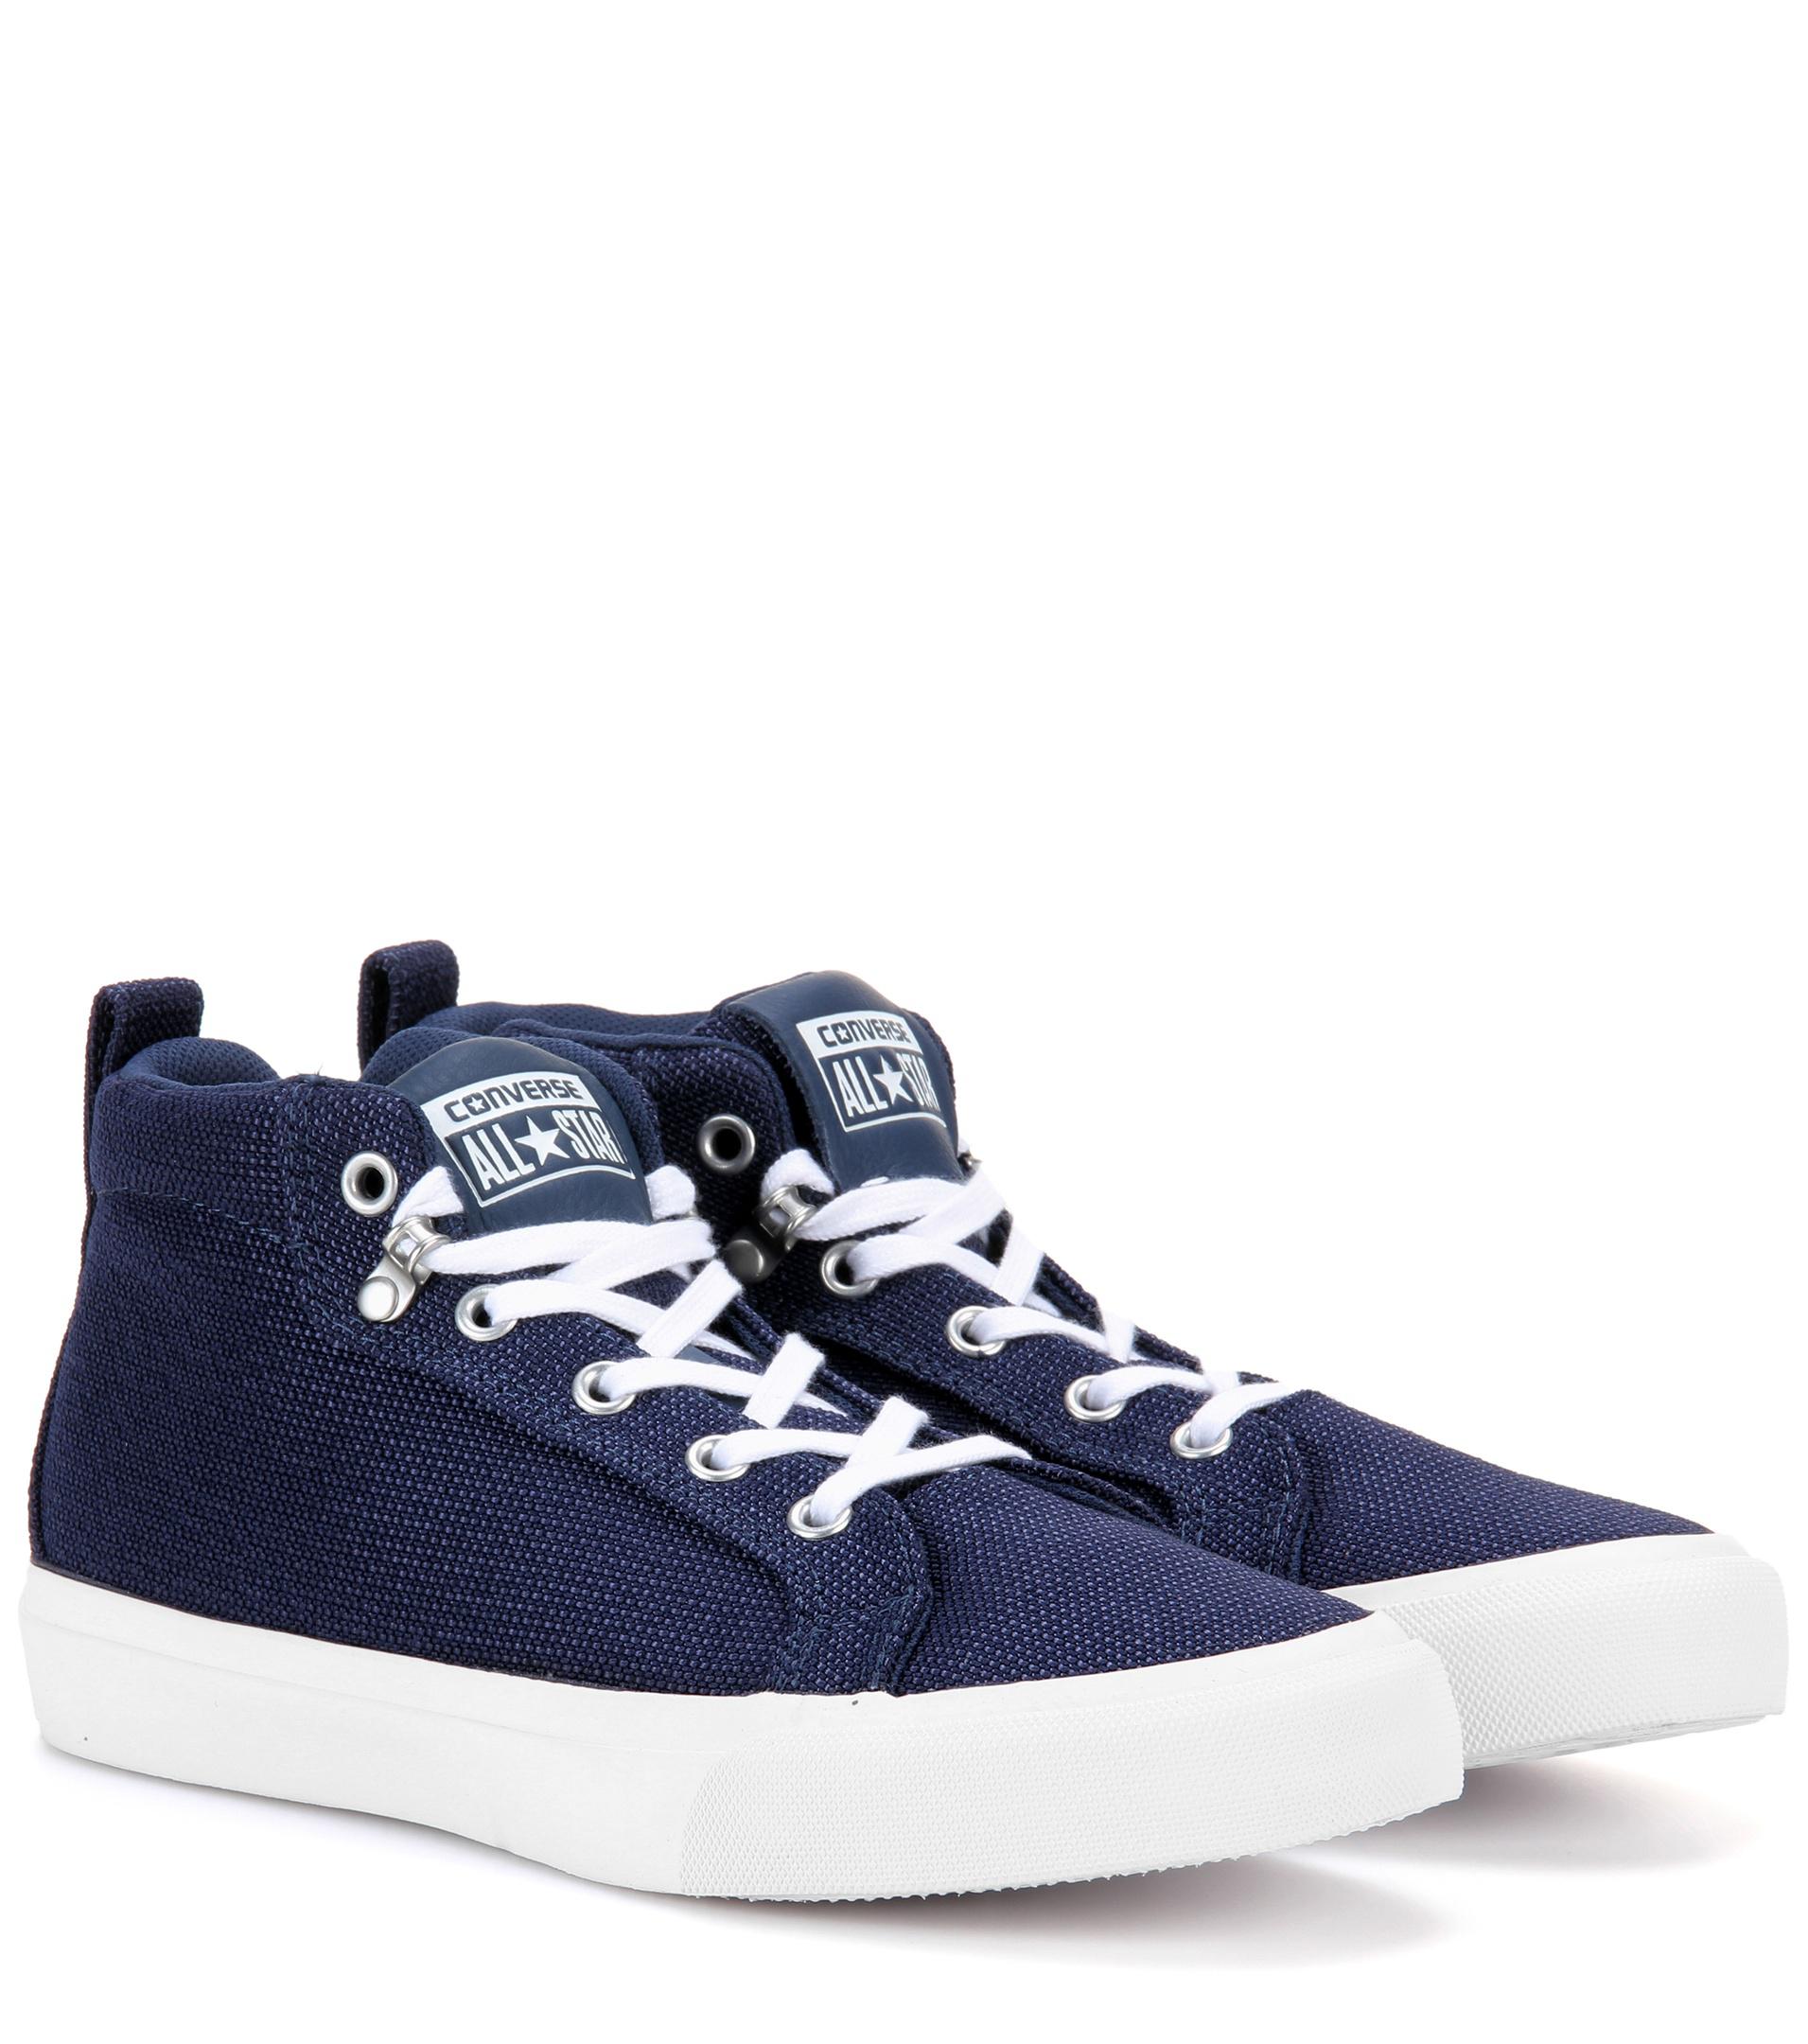 Converse All Star Fulton Mid Sneakers in Blue - Lyst